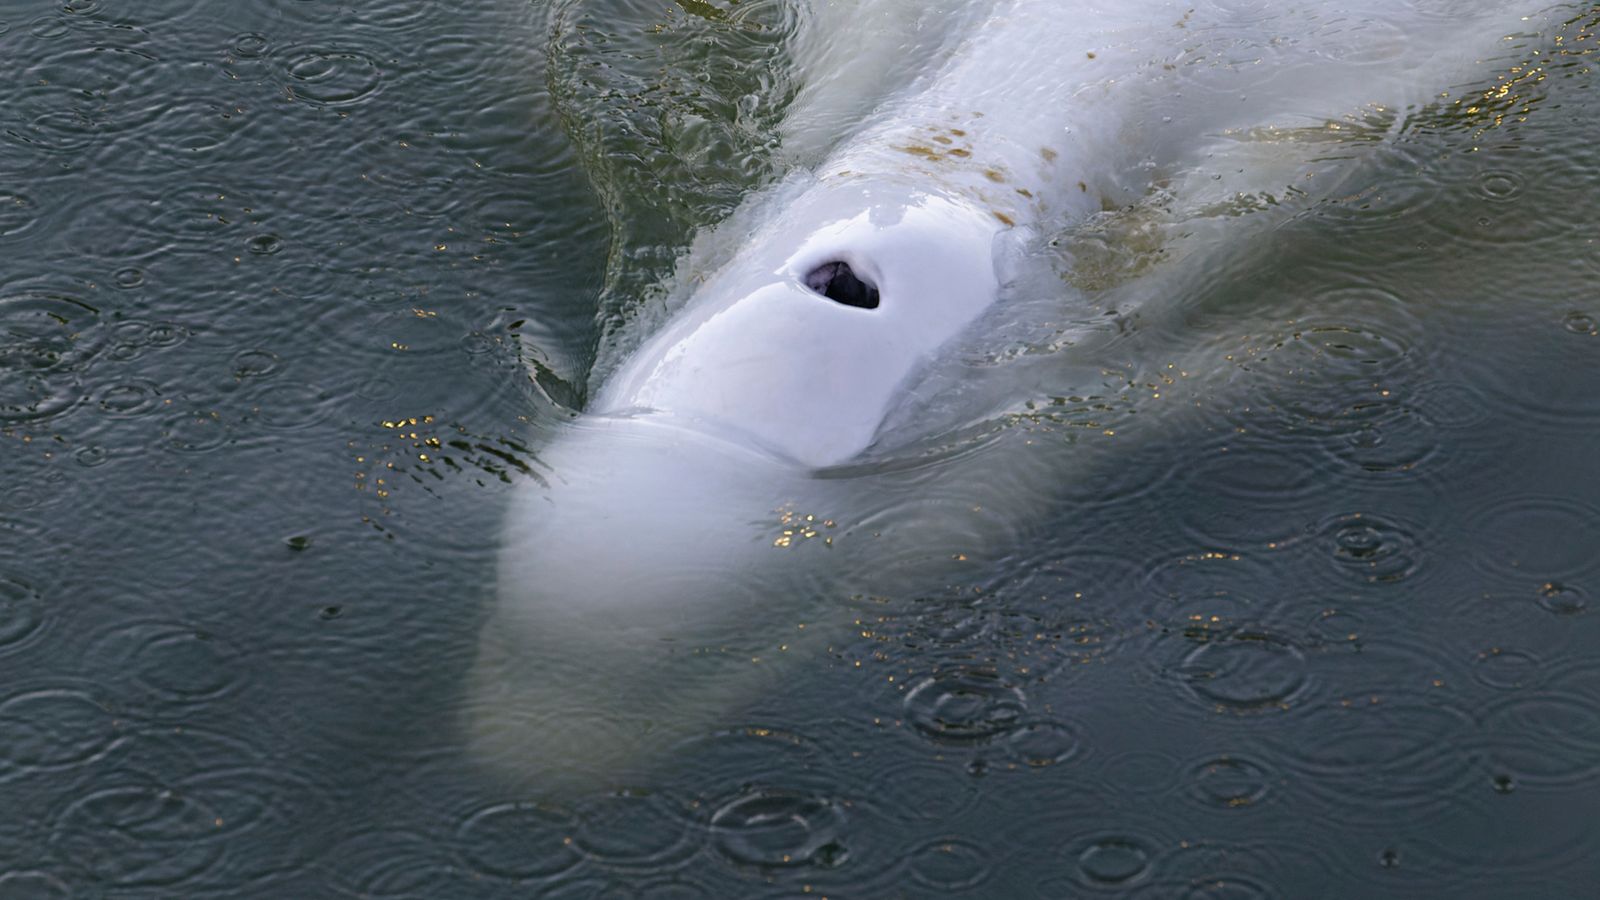 In this image, taken Saturday, Aug. 6, 2022 by environmental group Sea Shepherd, shows a Beluga whale in the Seine river in Notre Dame de la Garenne, west of Paris. French environmentalists said Monday efforts to feed a dangerously thin Beluga whale that has strayed into the Seine River have failed so far. Experts are now seeking ways to get the animal out of the river lock where it is now stuck. (Sea Shepherd via AP)